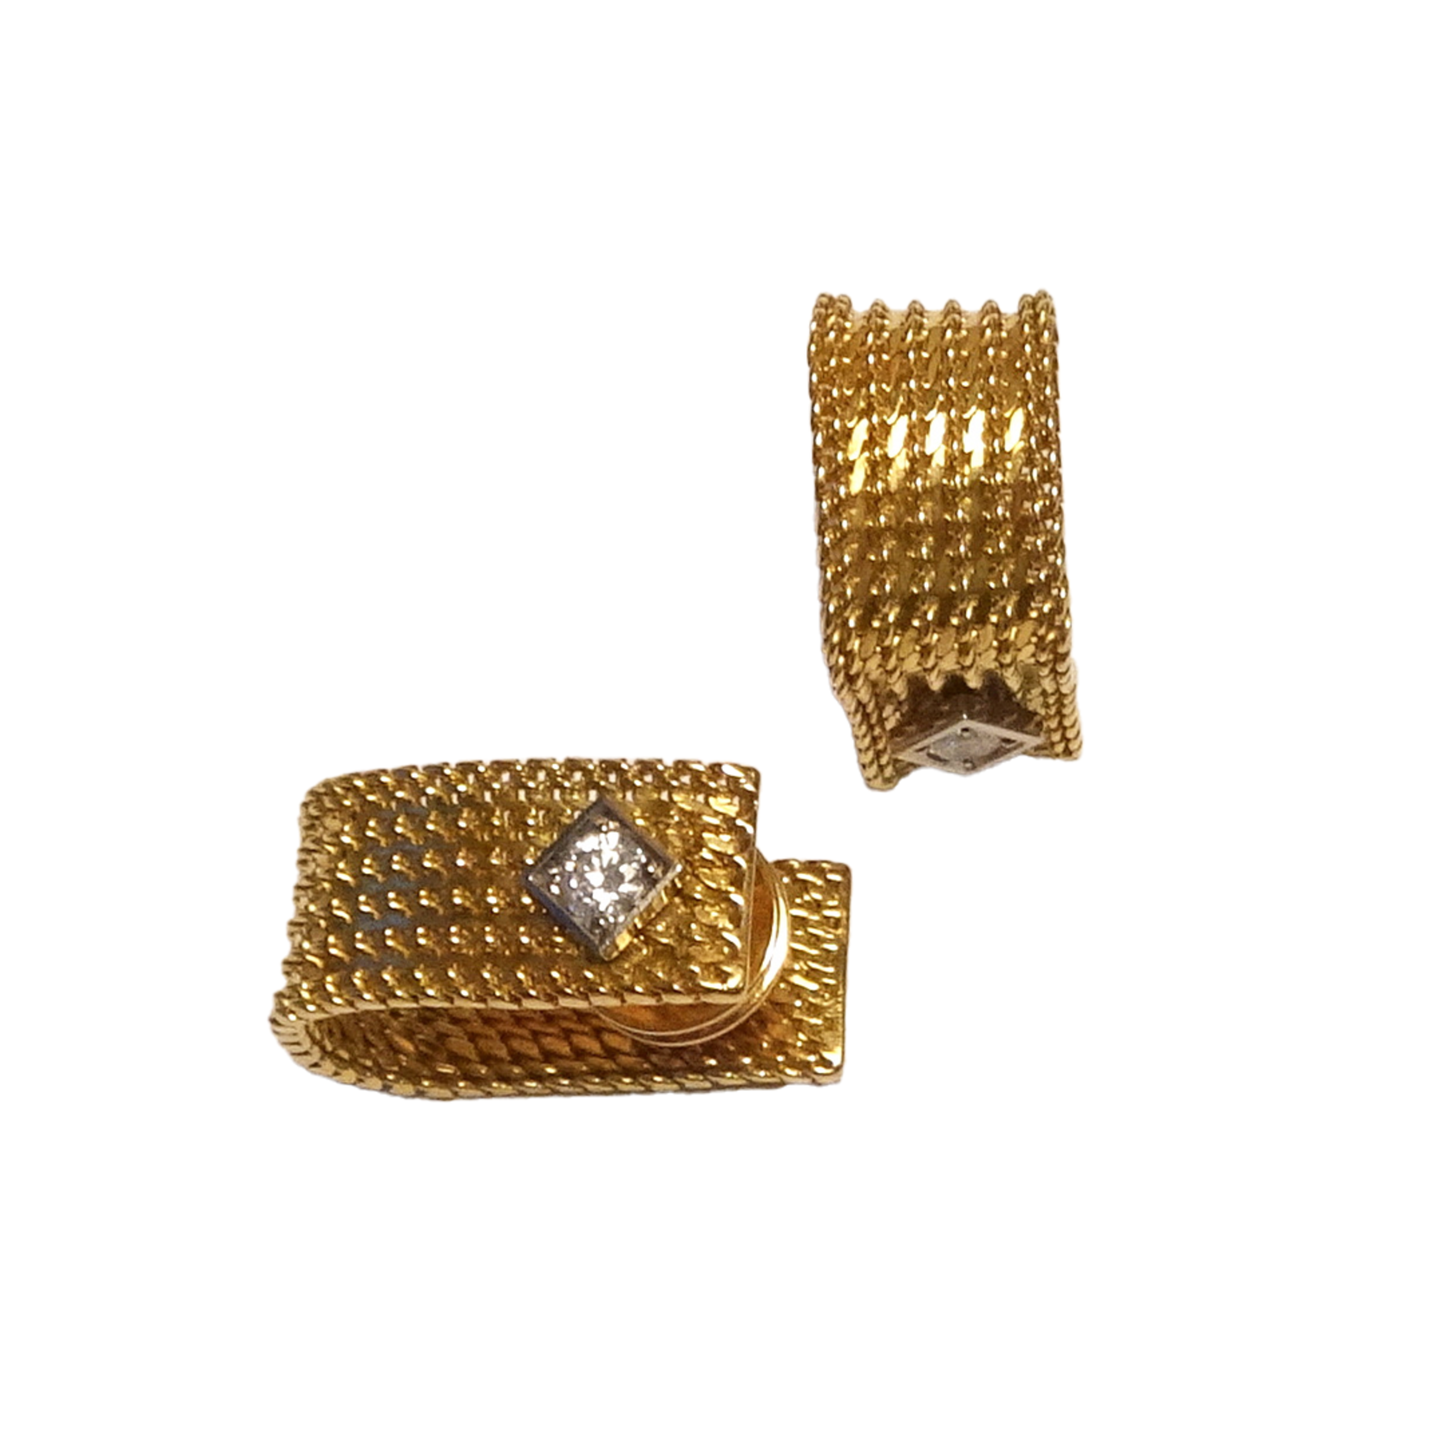 1960s 18KT Yellow Gold Diamond Cufflinks front and top